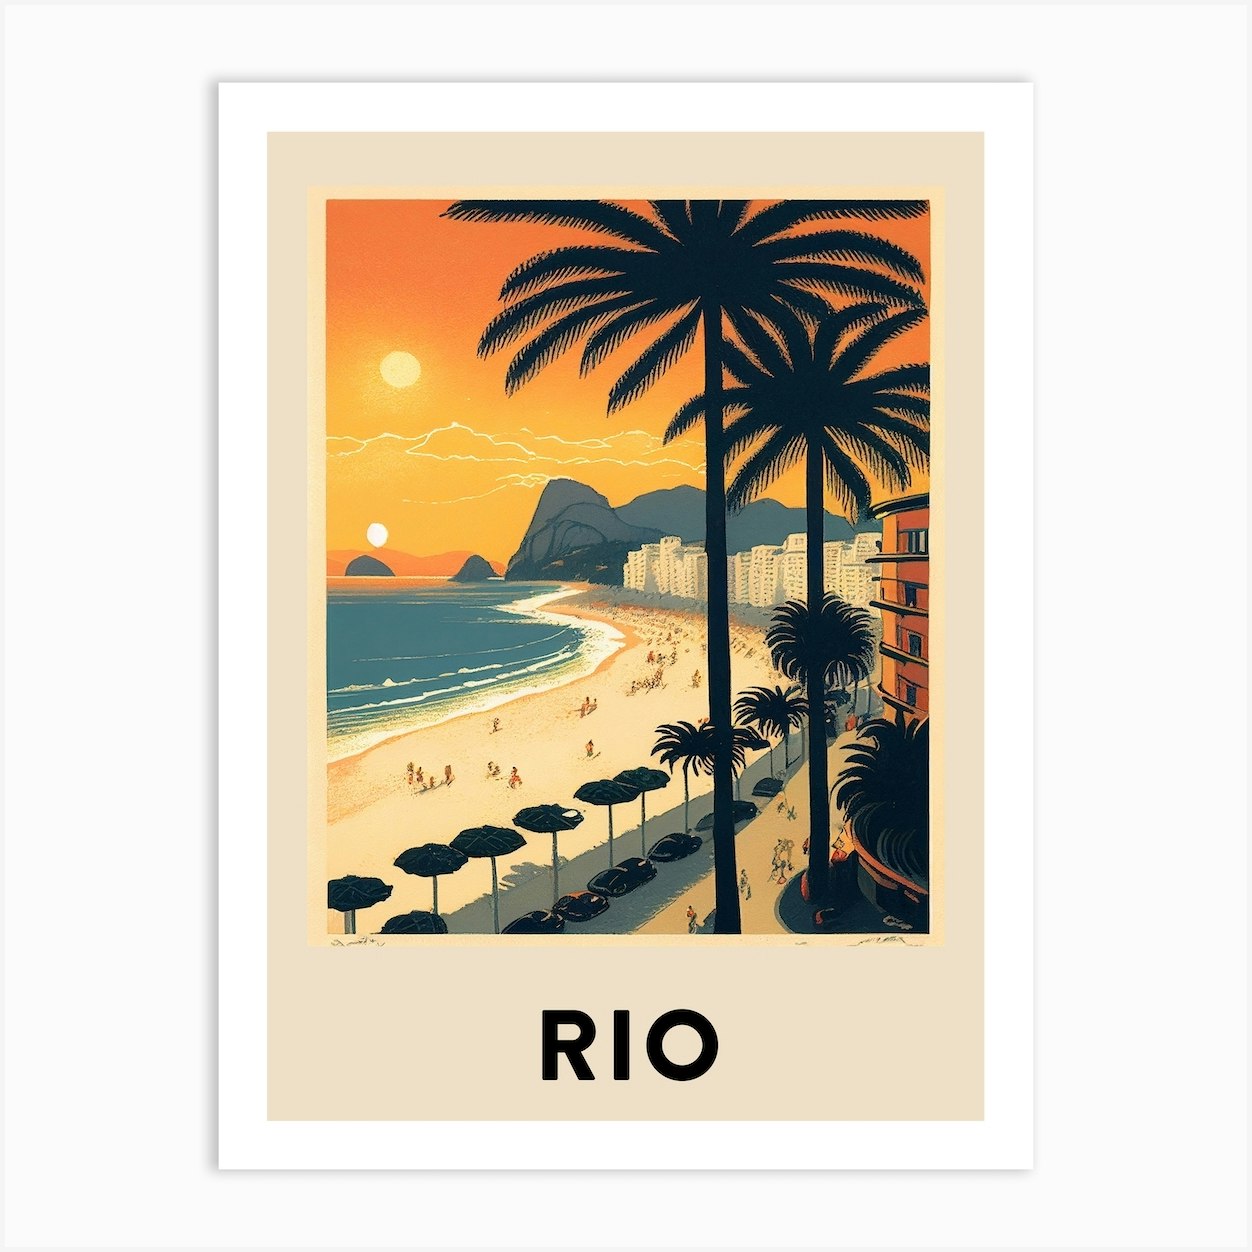 Rio 2 Vintage Travel Poster Art Print by Travel Poster Collection - Fy